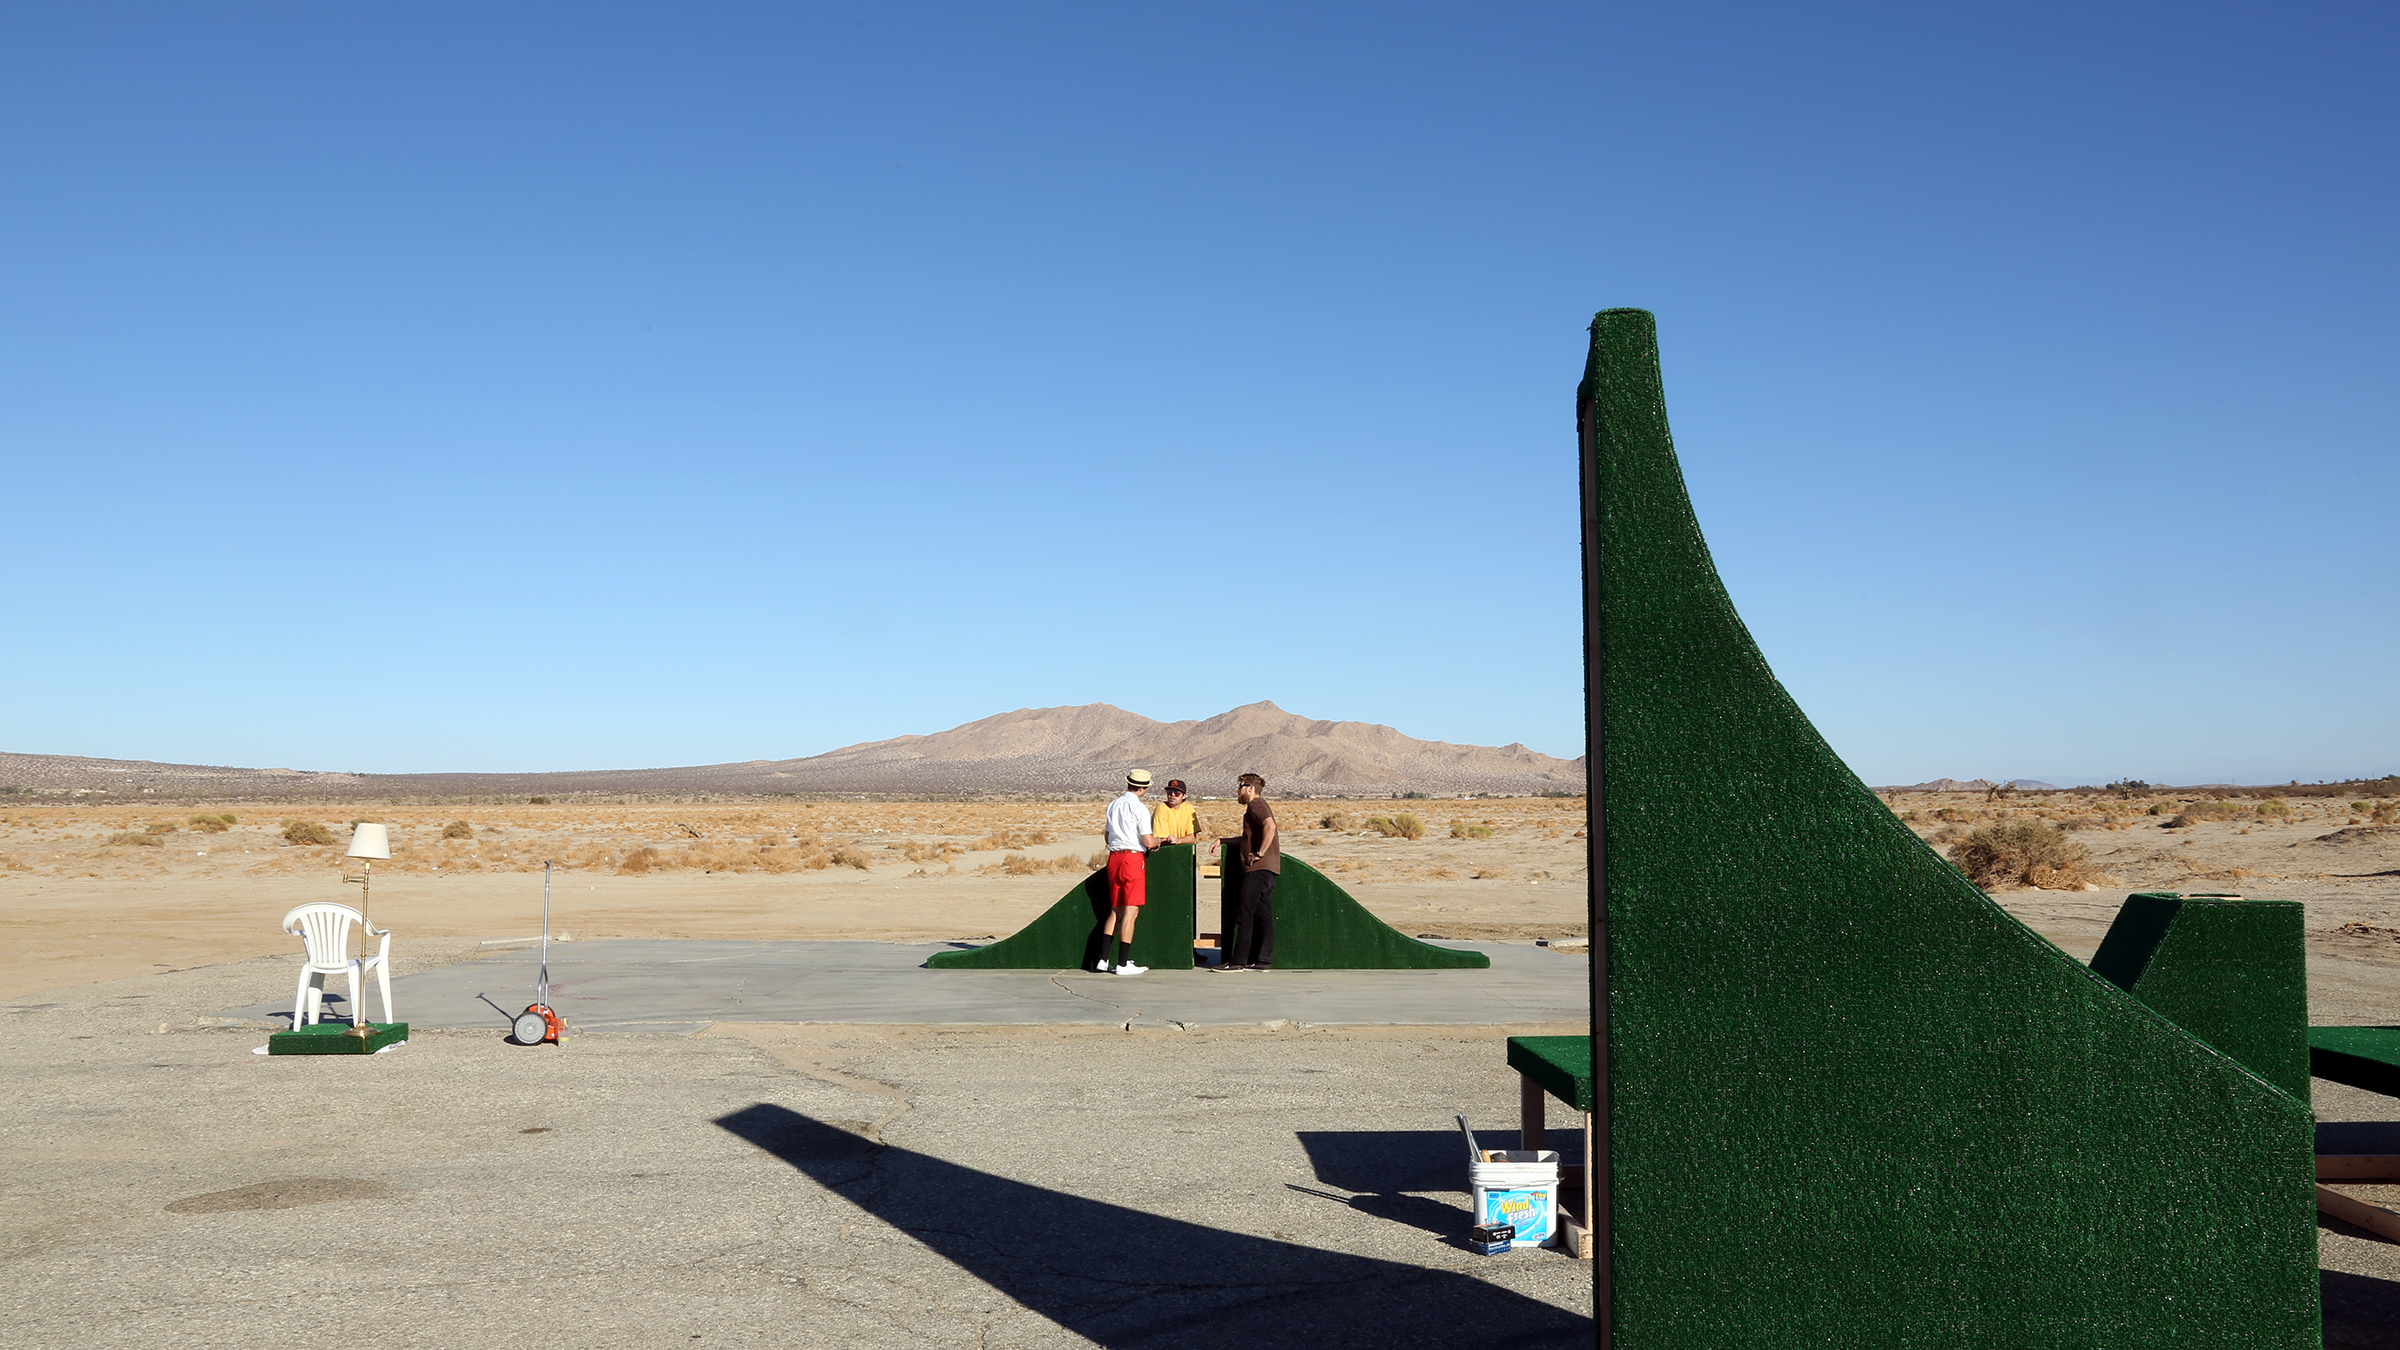 Three people chatting next to green, curved sculptures in the middle of desert shrubland.